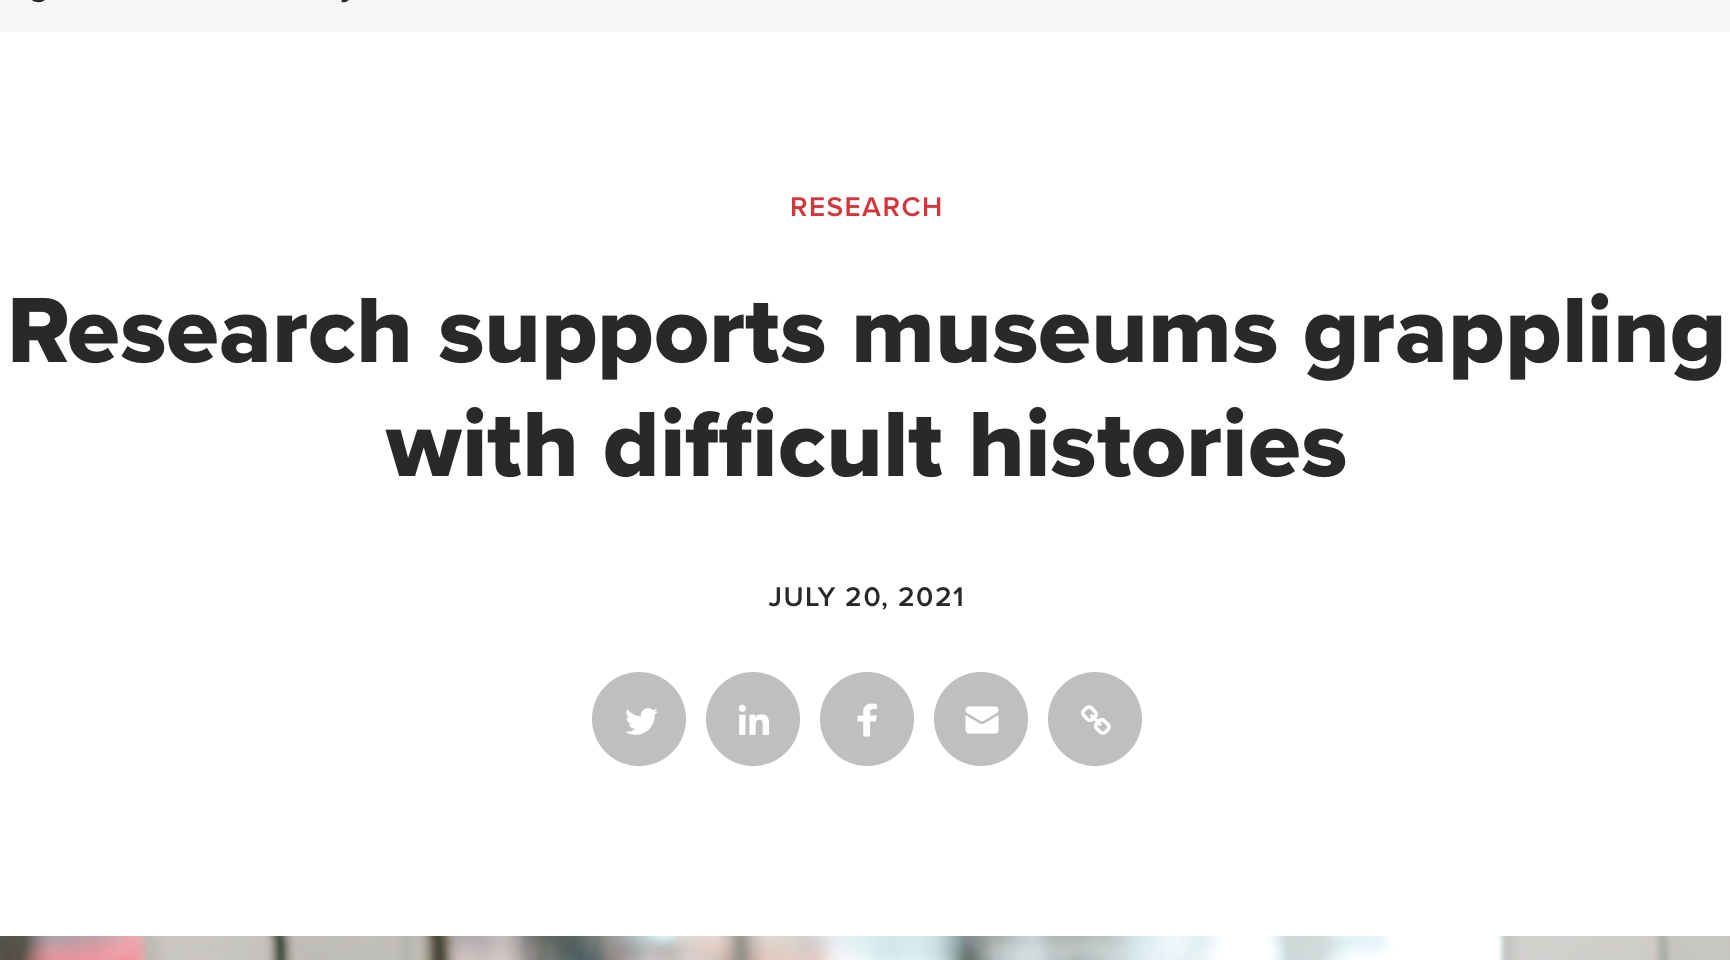 Click here to learn more about Museum Queeries and the TTTM Research Network Partnership Grant!